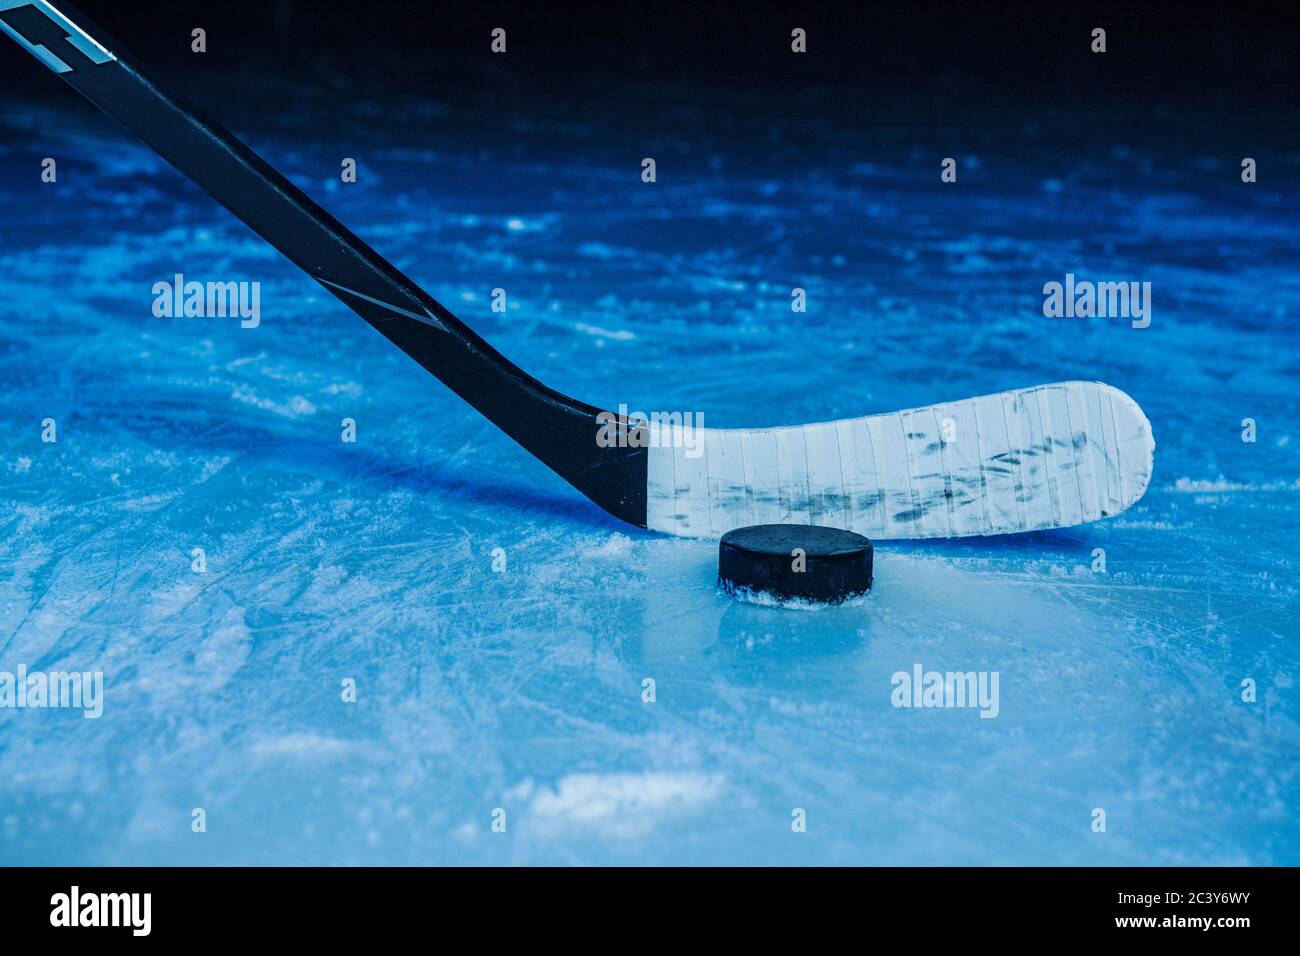 Hockey stick and puck in a cloud of ice chips stock photo - OFFSET